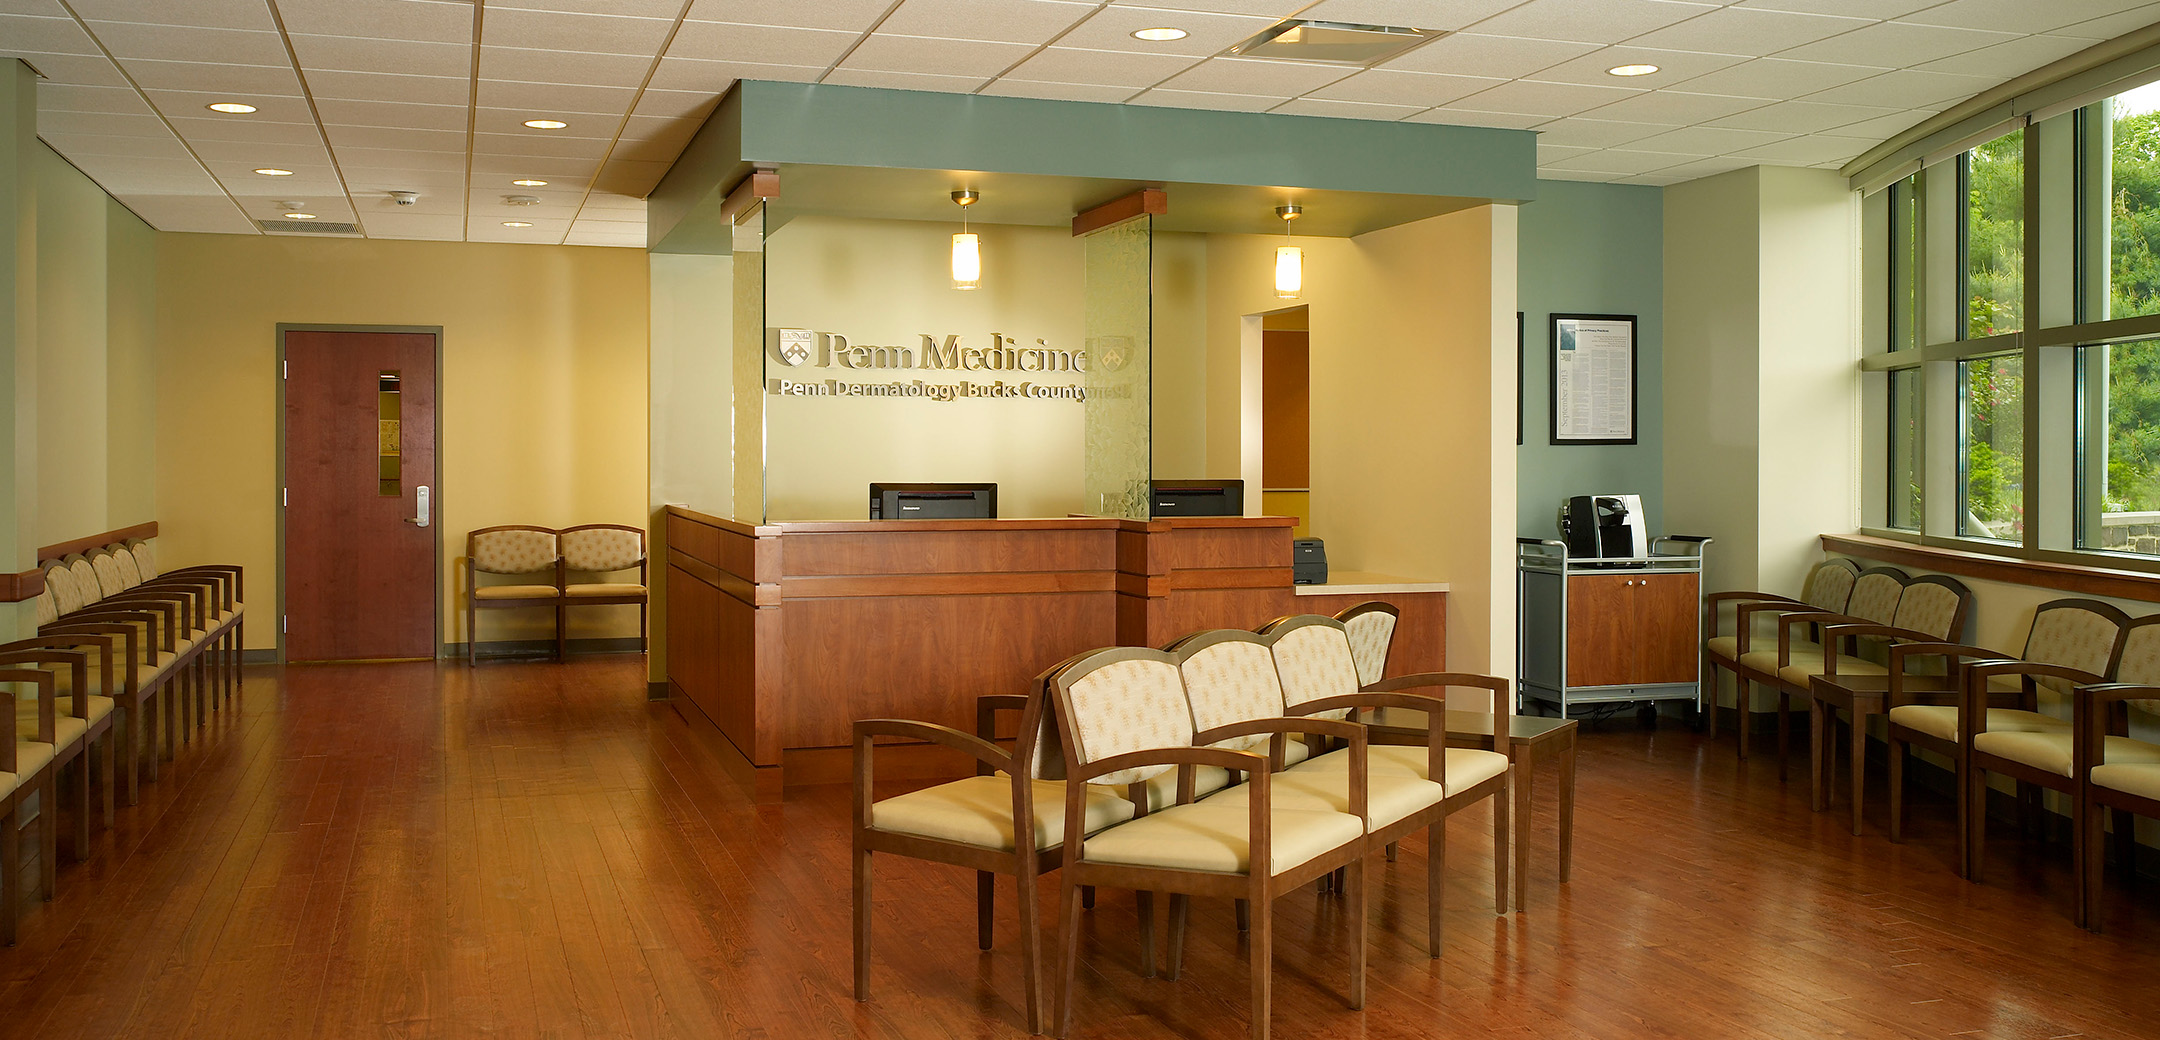 An empty lobby with chairs and a reception desk of Penn Medicine Dermatology office at Floral Vale Corporate Center.